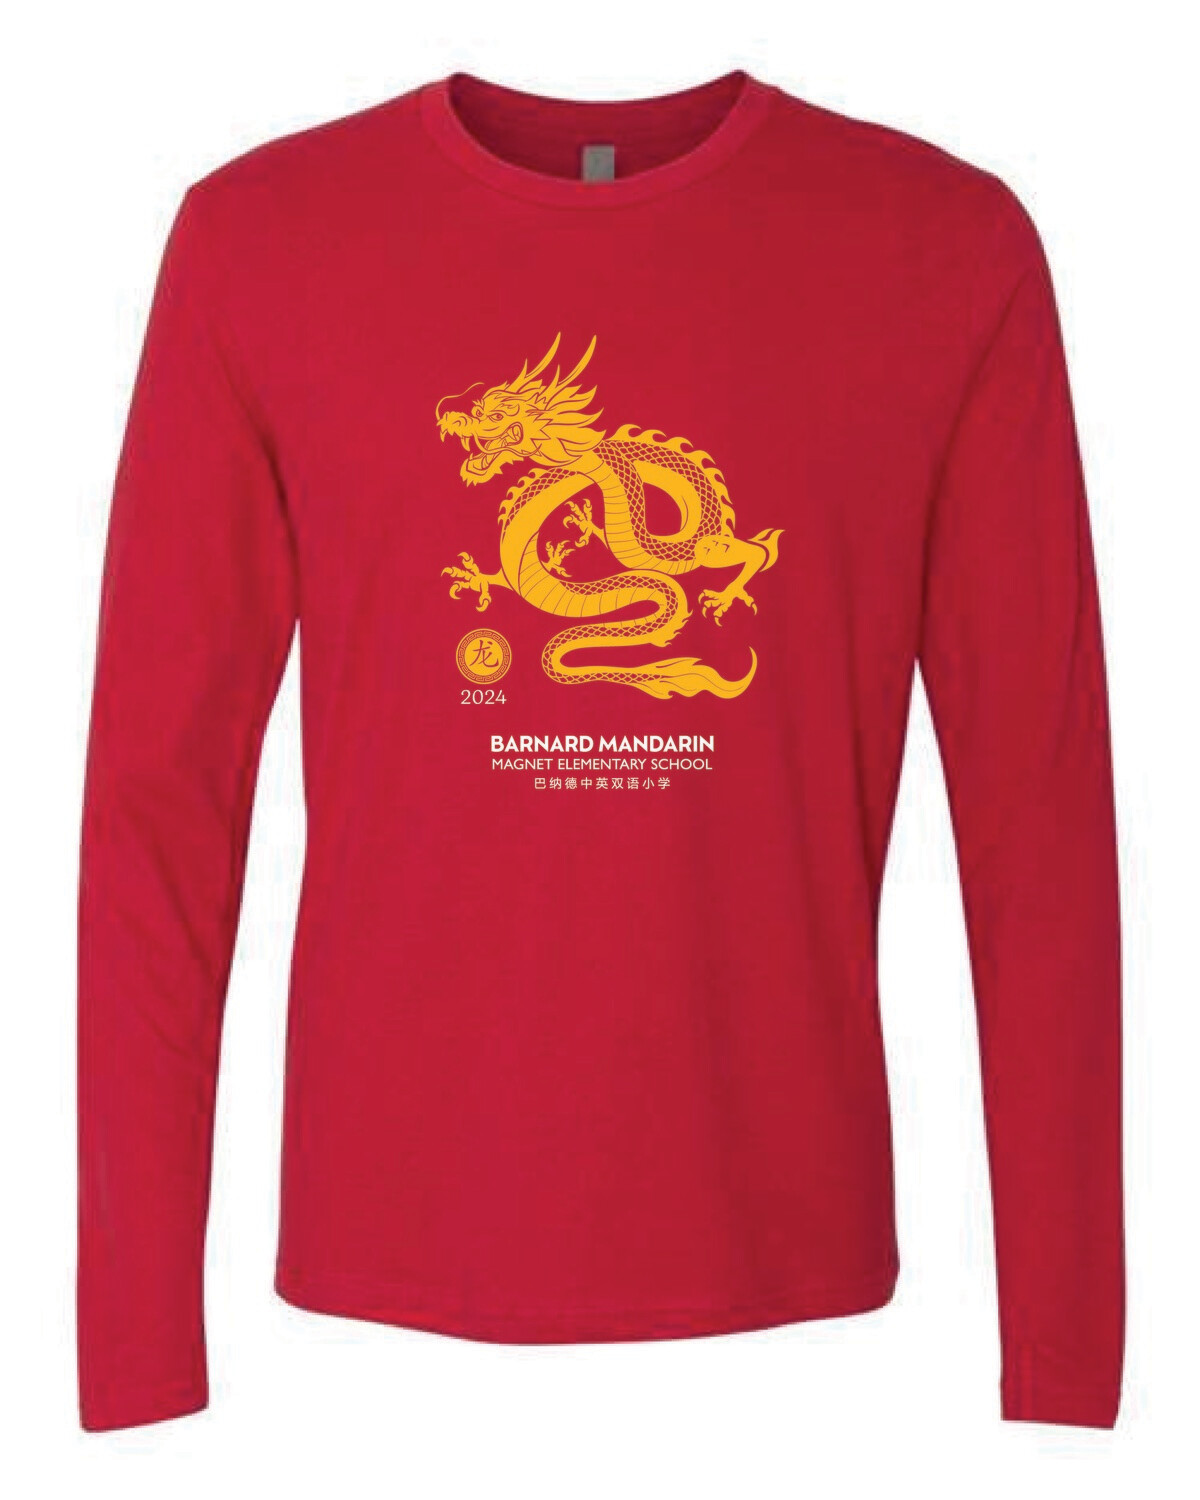 2024 Lunar New Year Unisex Adult Long Sleeve T-Shirt (order by 1/10/24)